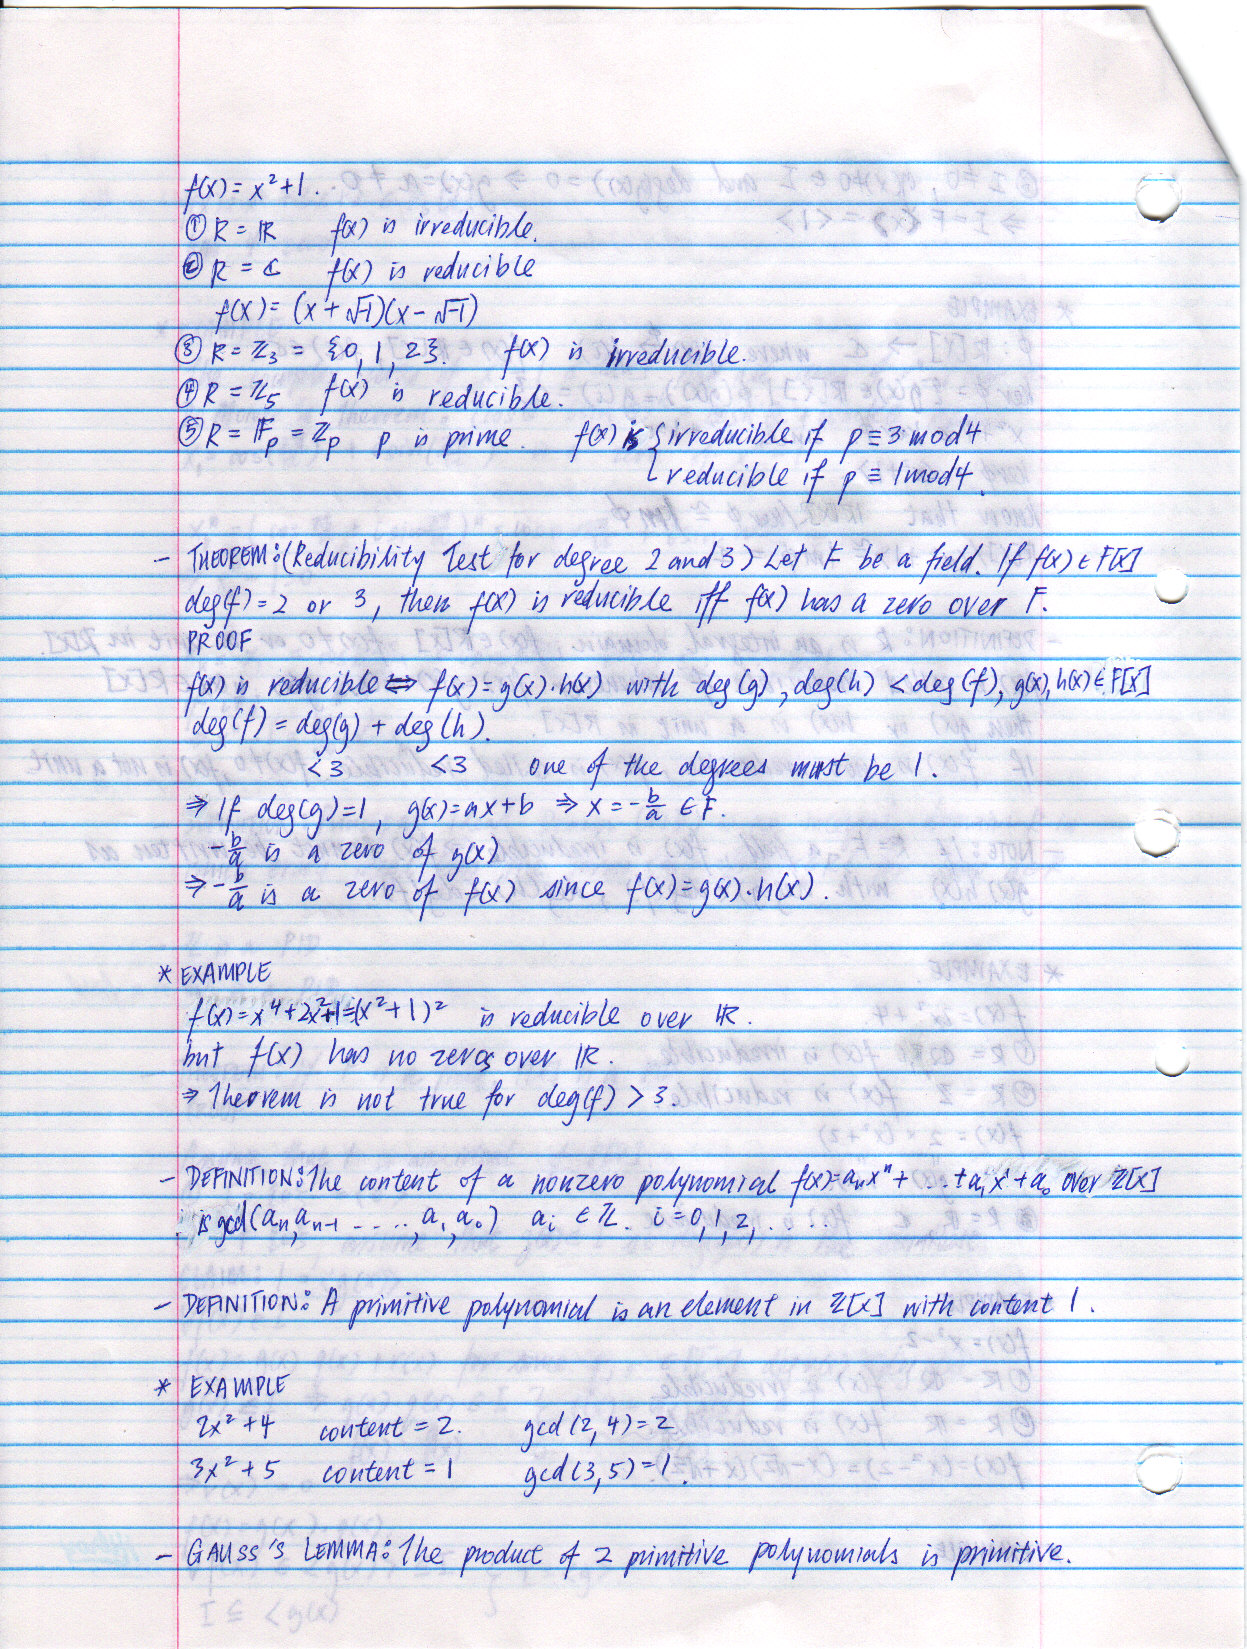 07-401 lecture5-pg4.jpg